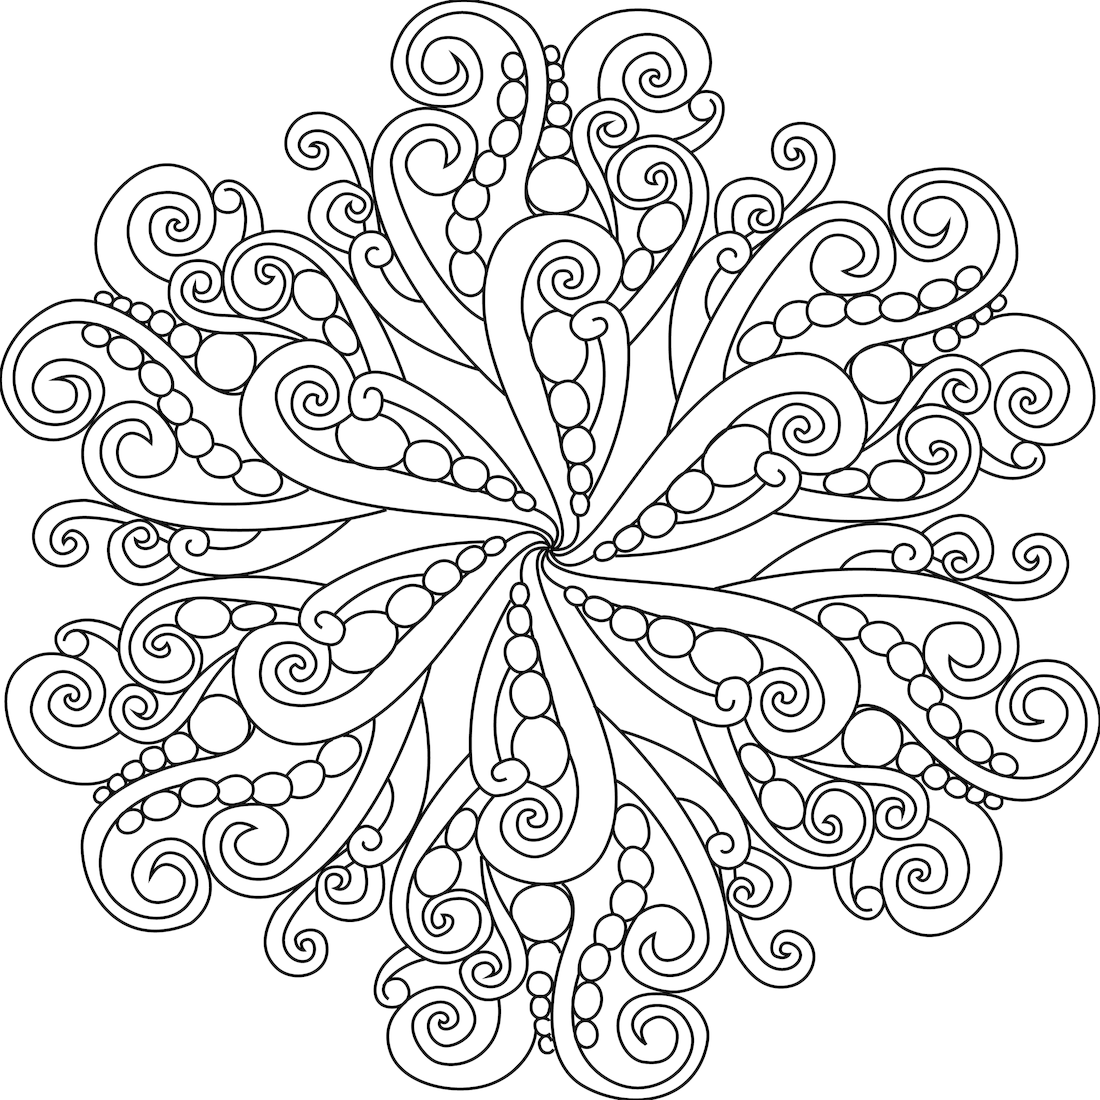 Coloring Pages For Middle Schoolers at GetColoringscom